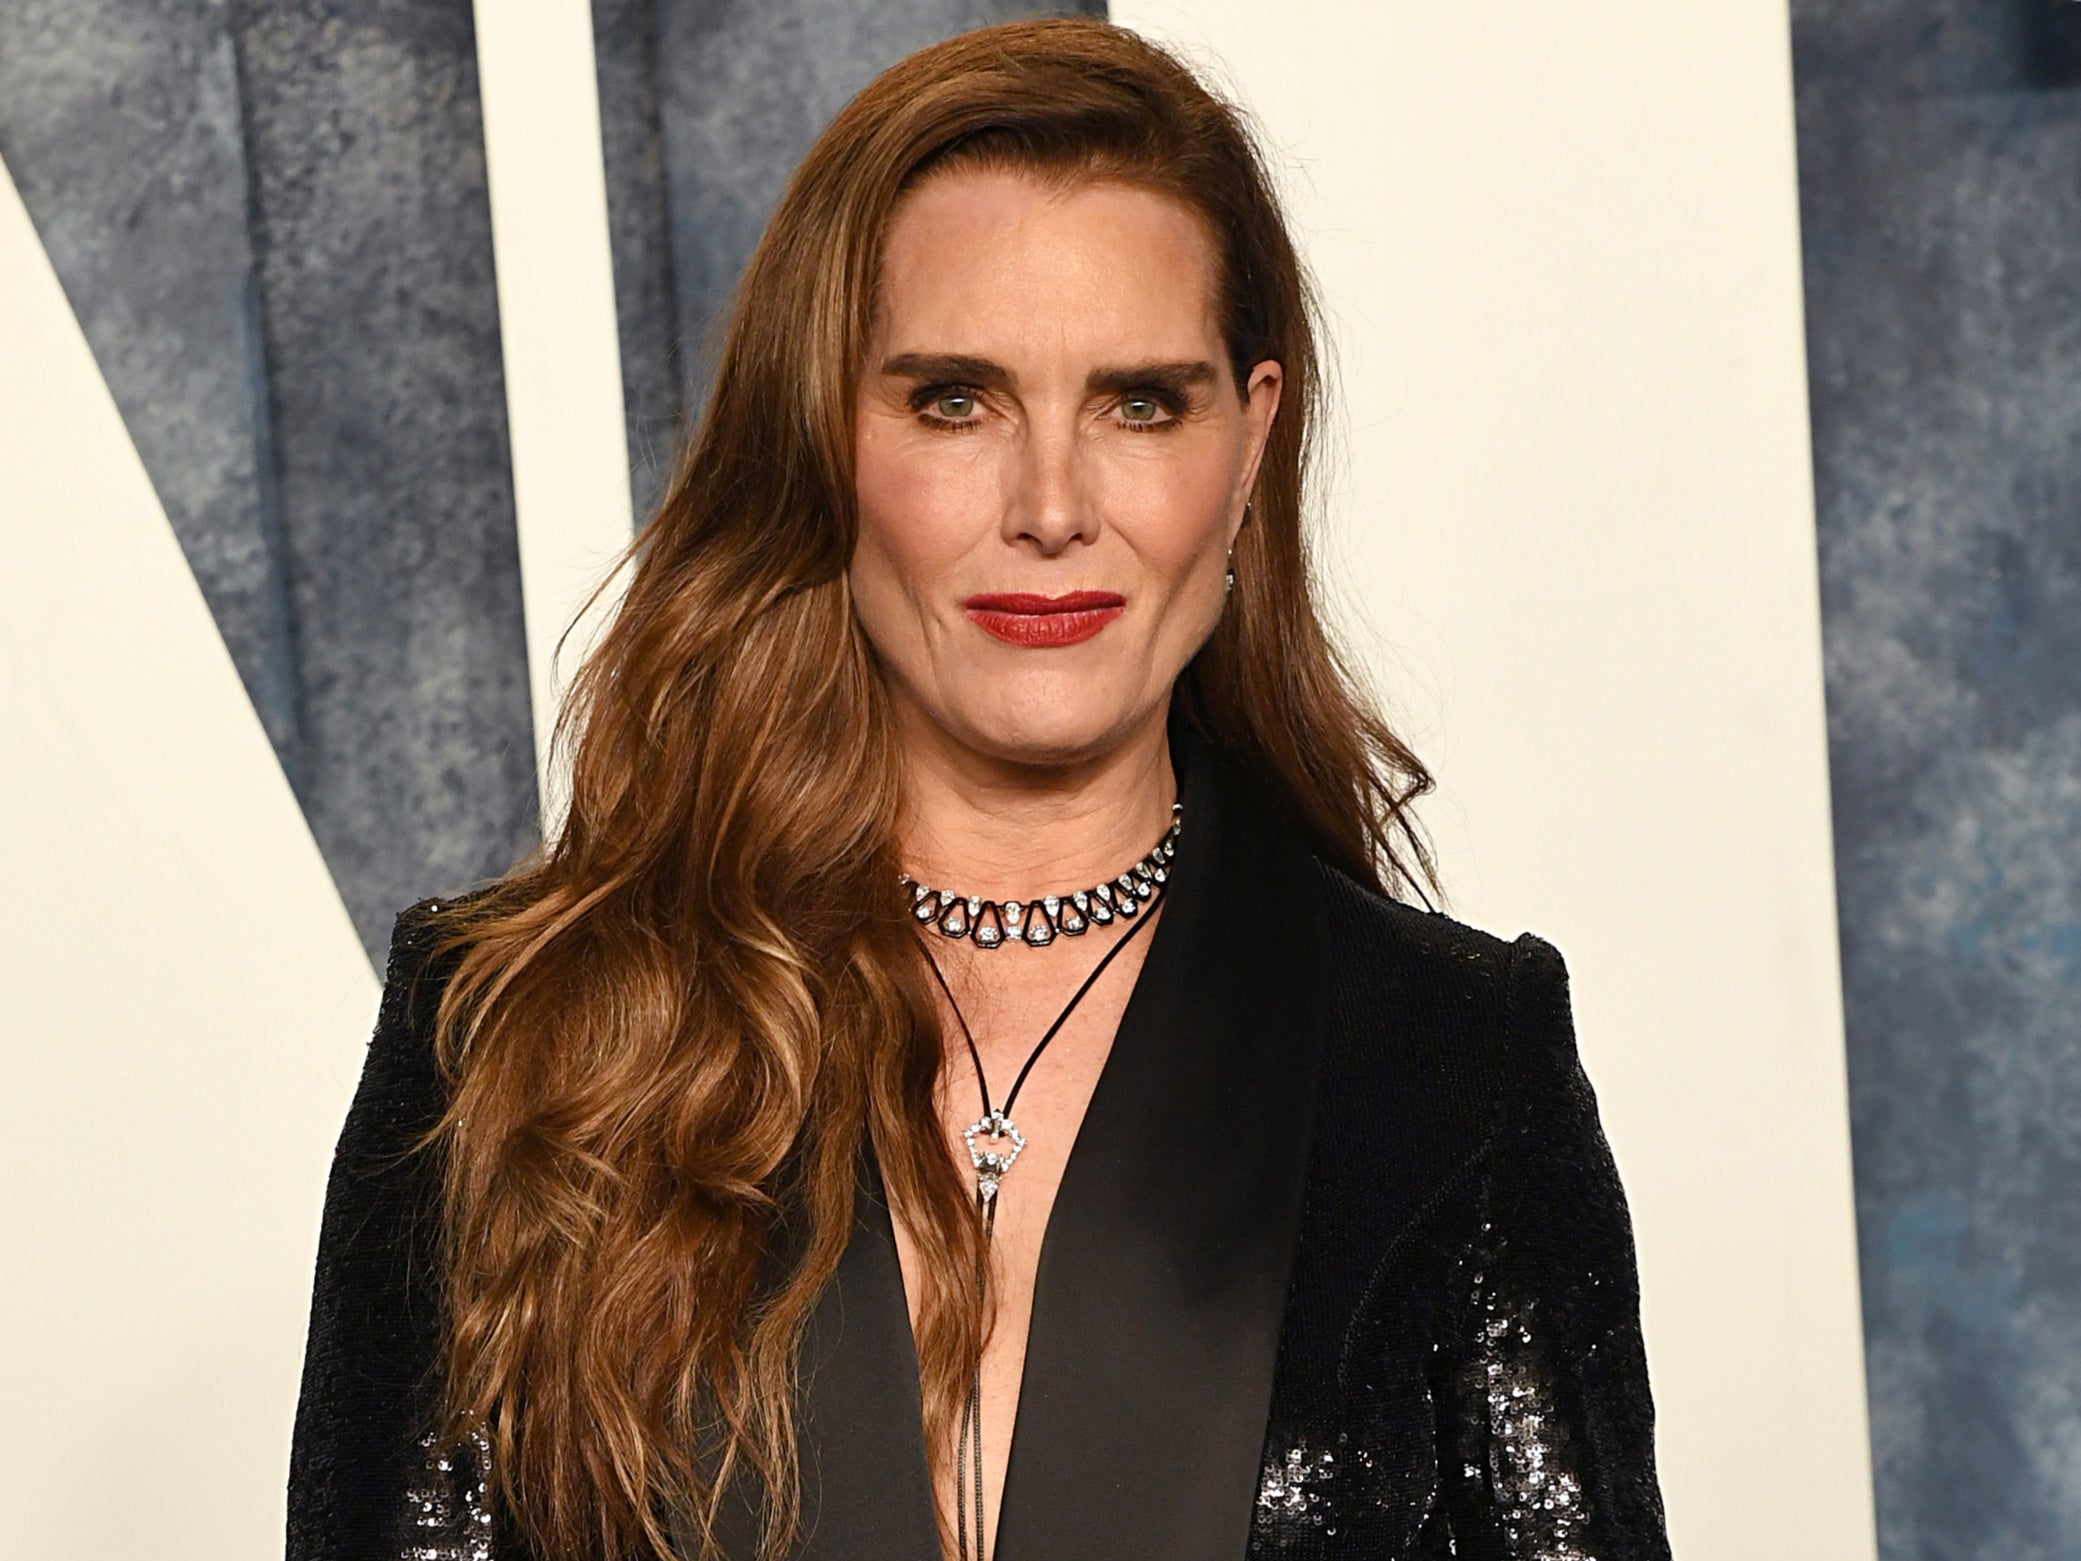 Brooke Shields Says She Didn’t Know Why Her Mother ‘thought It Was All Right’ For Her To Pose